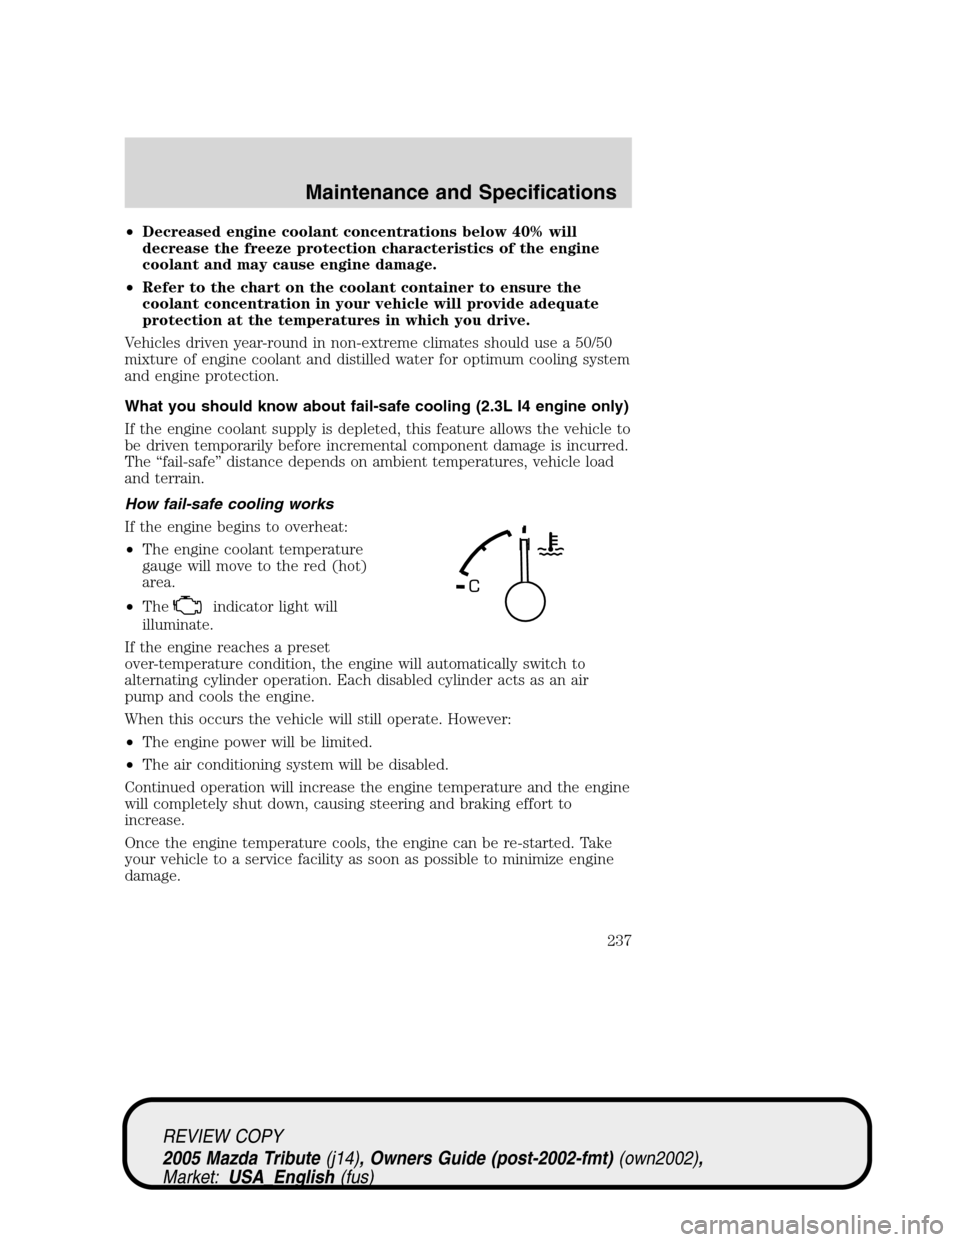 MAZDA MODEL TRIBUTE 2005  Owners Manual (in English) •Decreased engine coolant concentrations below 40% will
decrease the freeze protection characteristics of the engine
coolant and may cause engine damage.
•Refer to the chart on the coolant contain